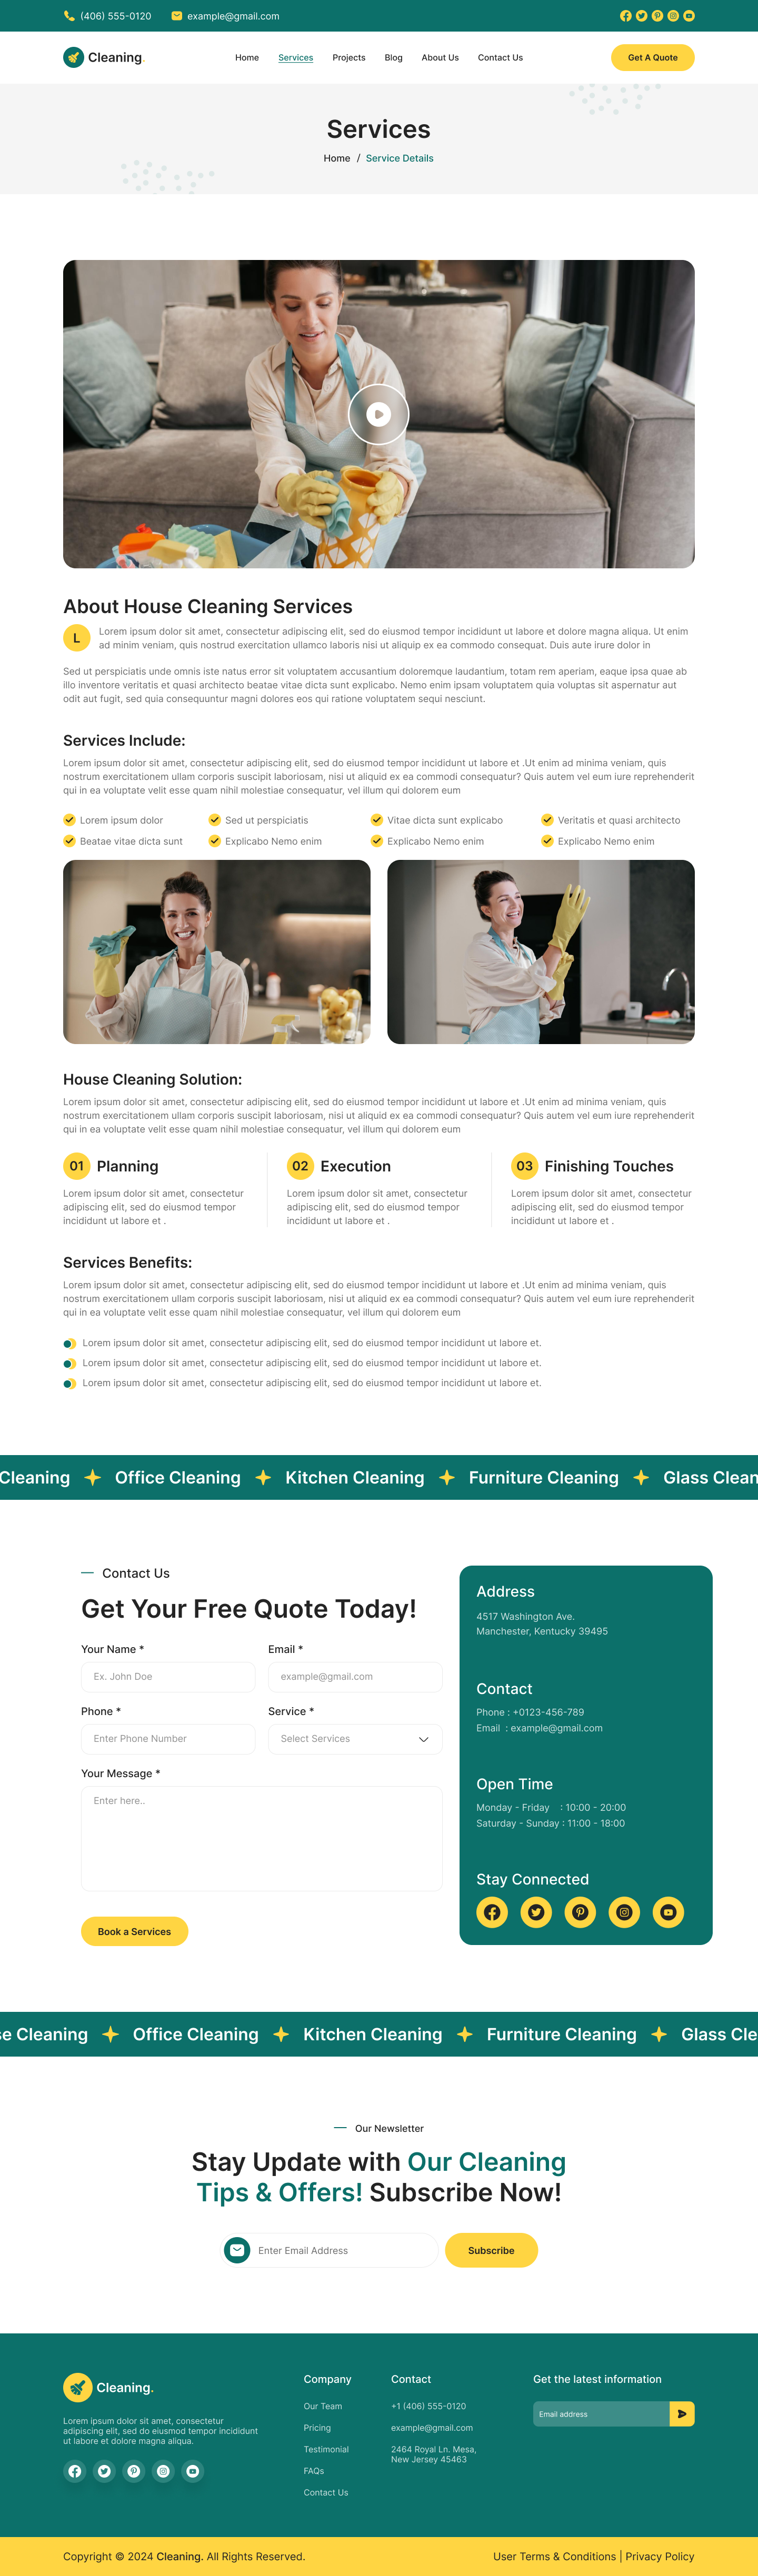 cleaning service website Service Details Page figma design